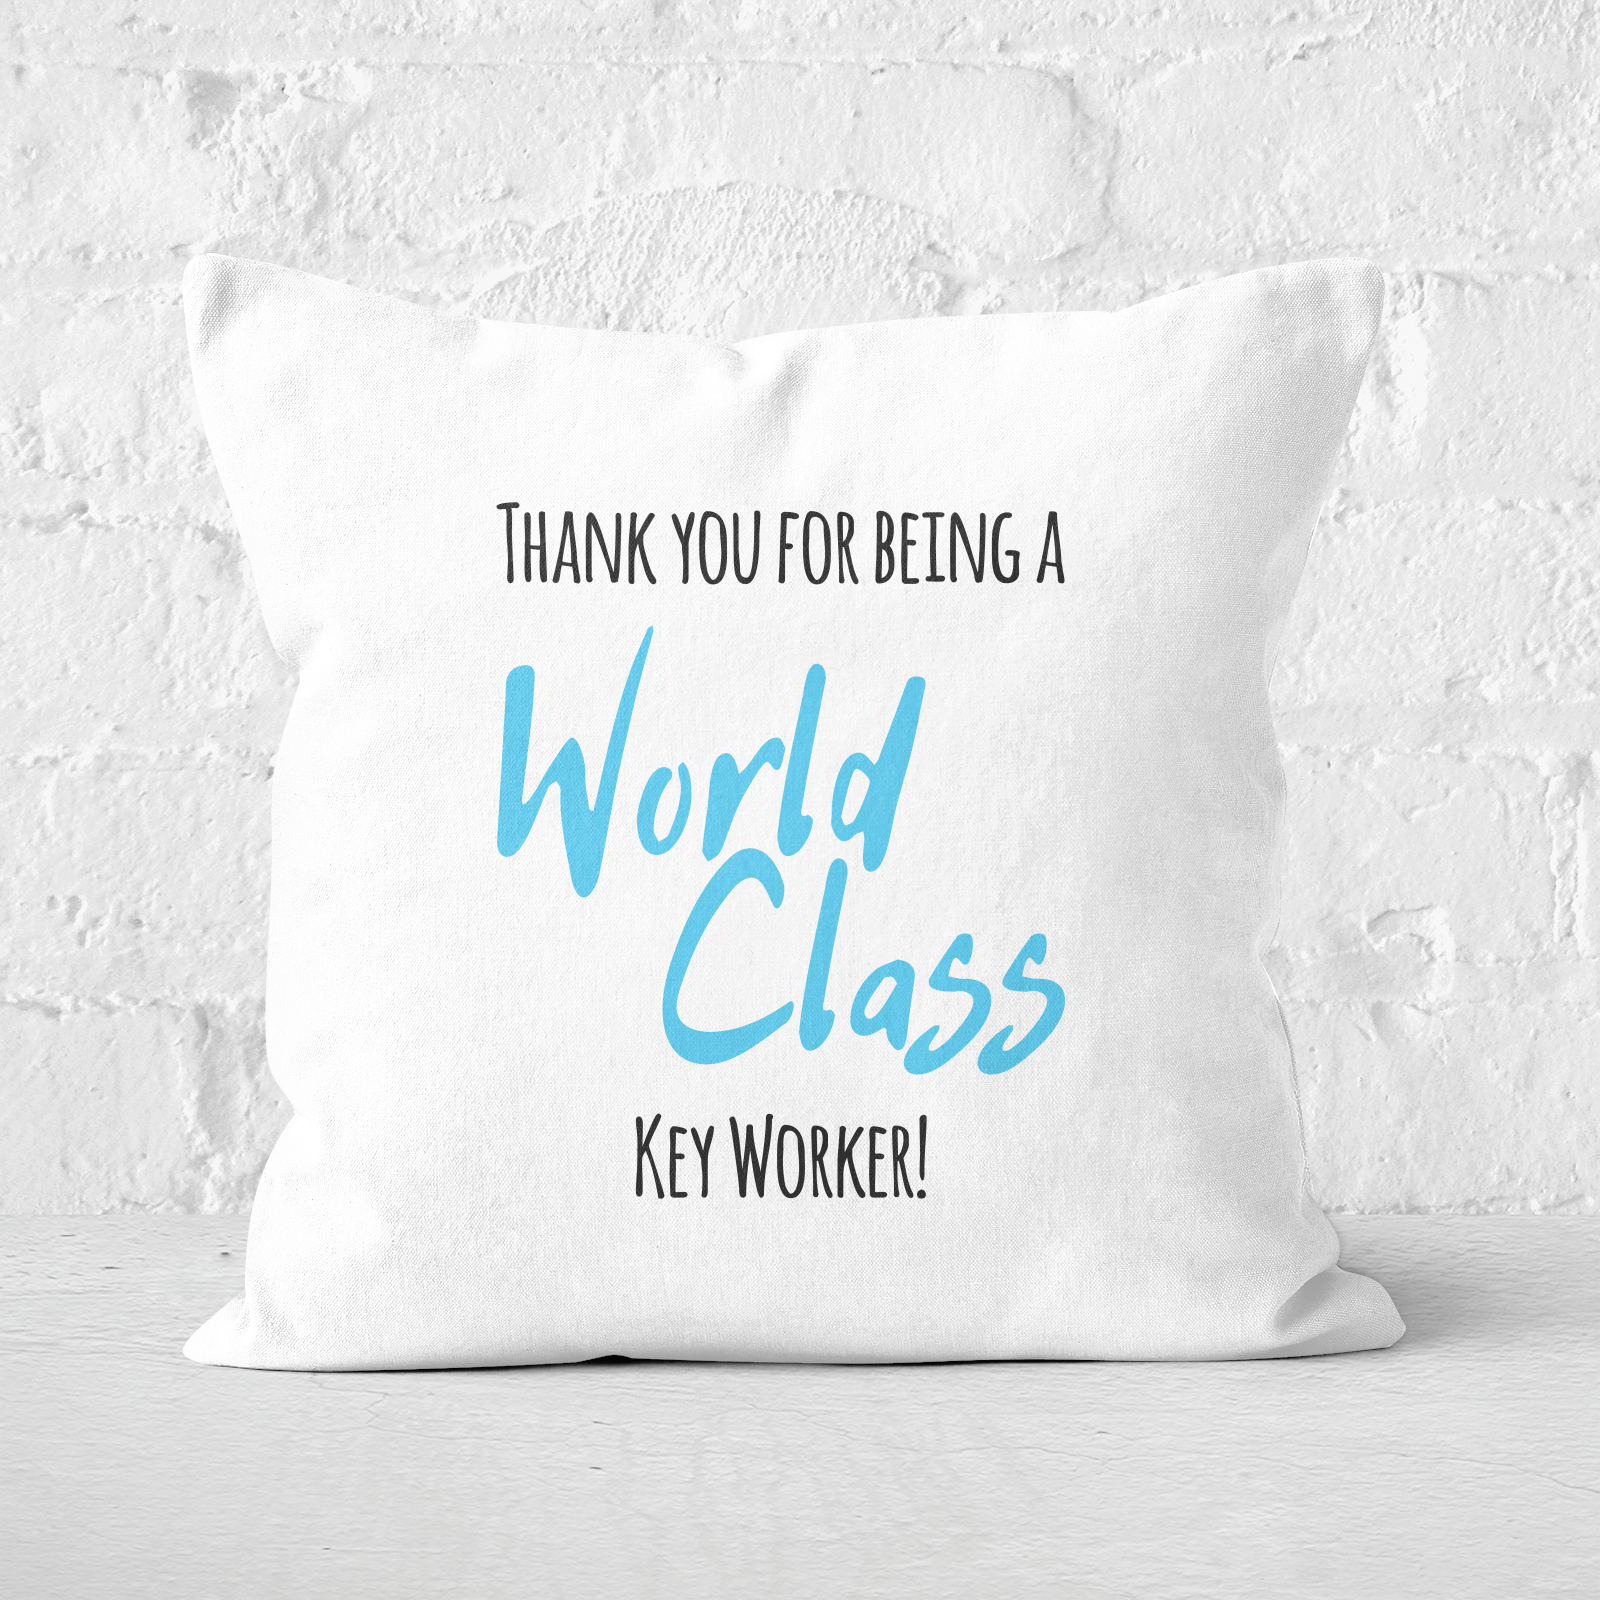 Thank You For Being A World Class Key Worker! Square Cushion - 60x60cm - Soft Touch